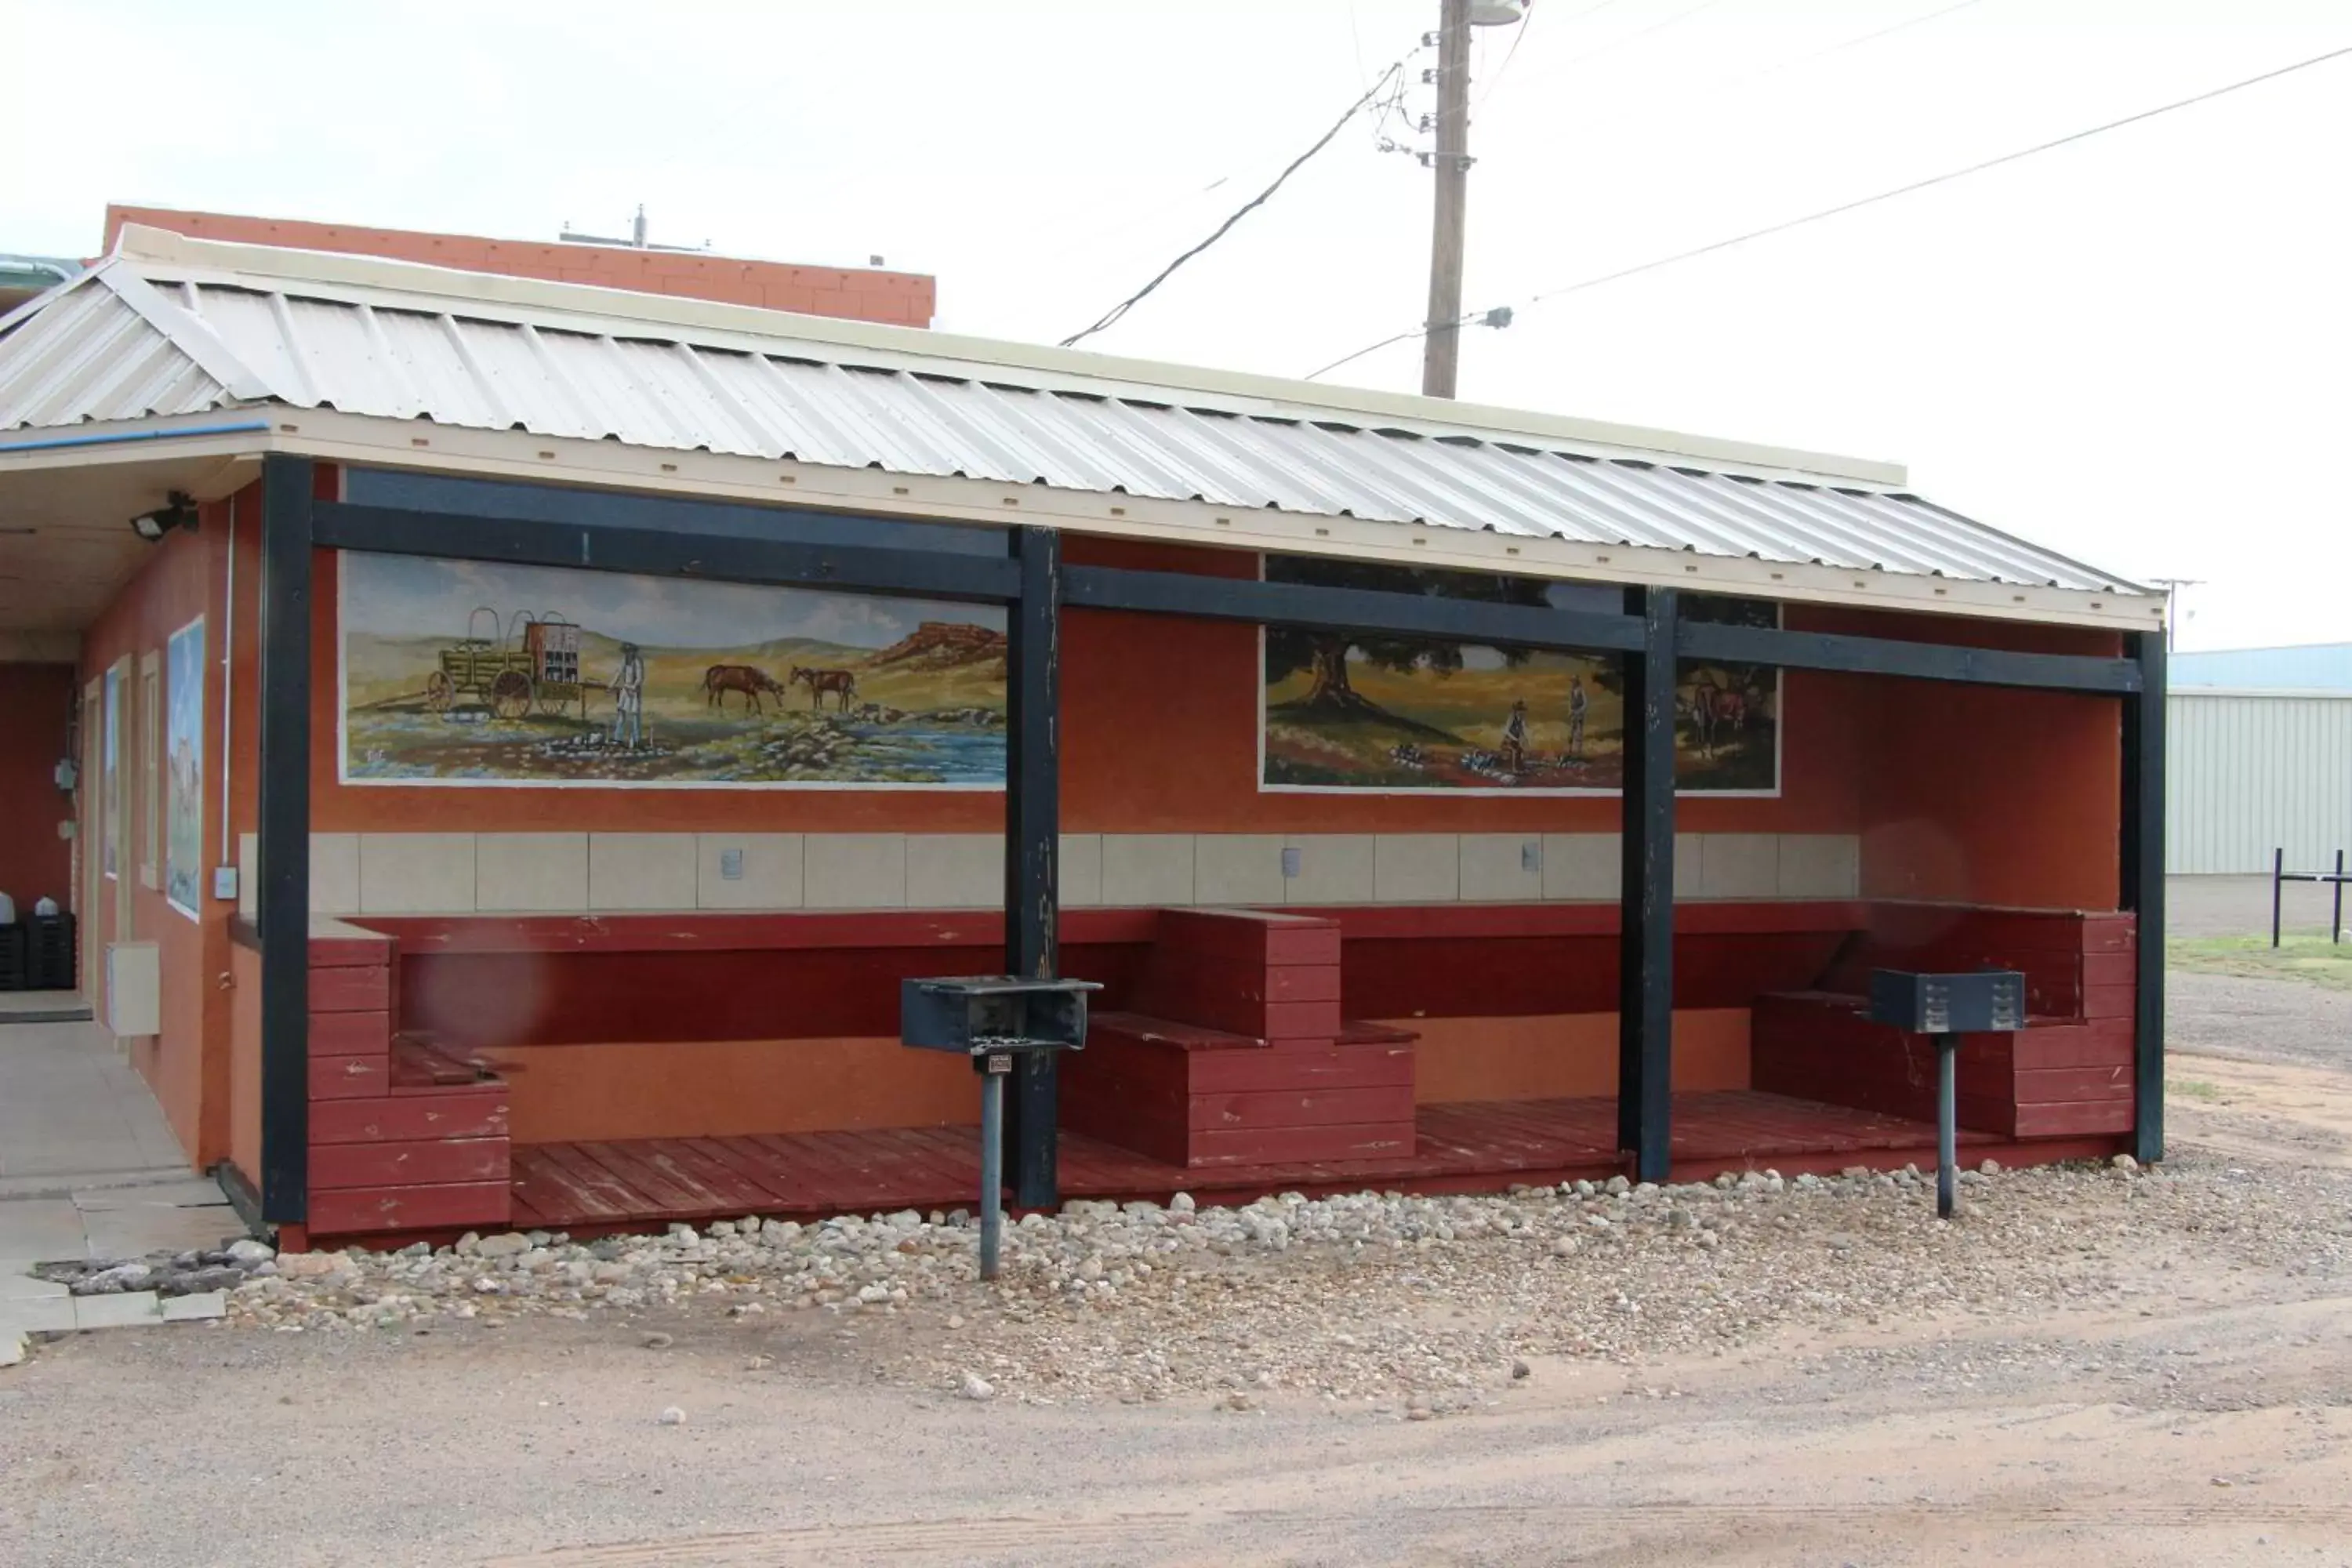 BBQ facilities, Property Building in Western Motel